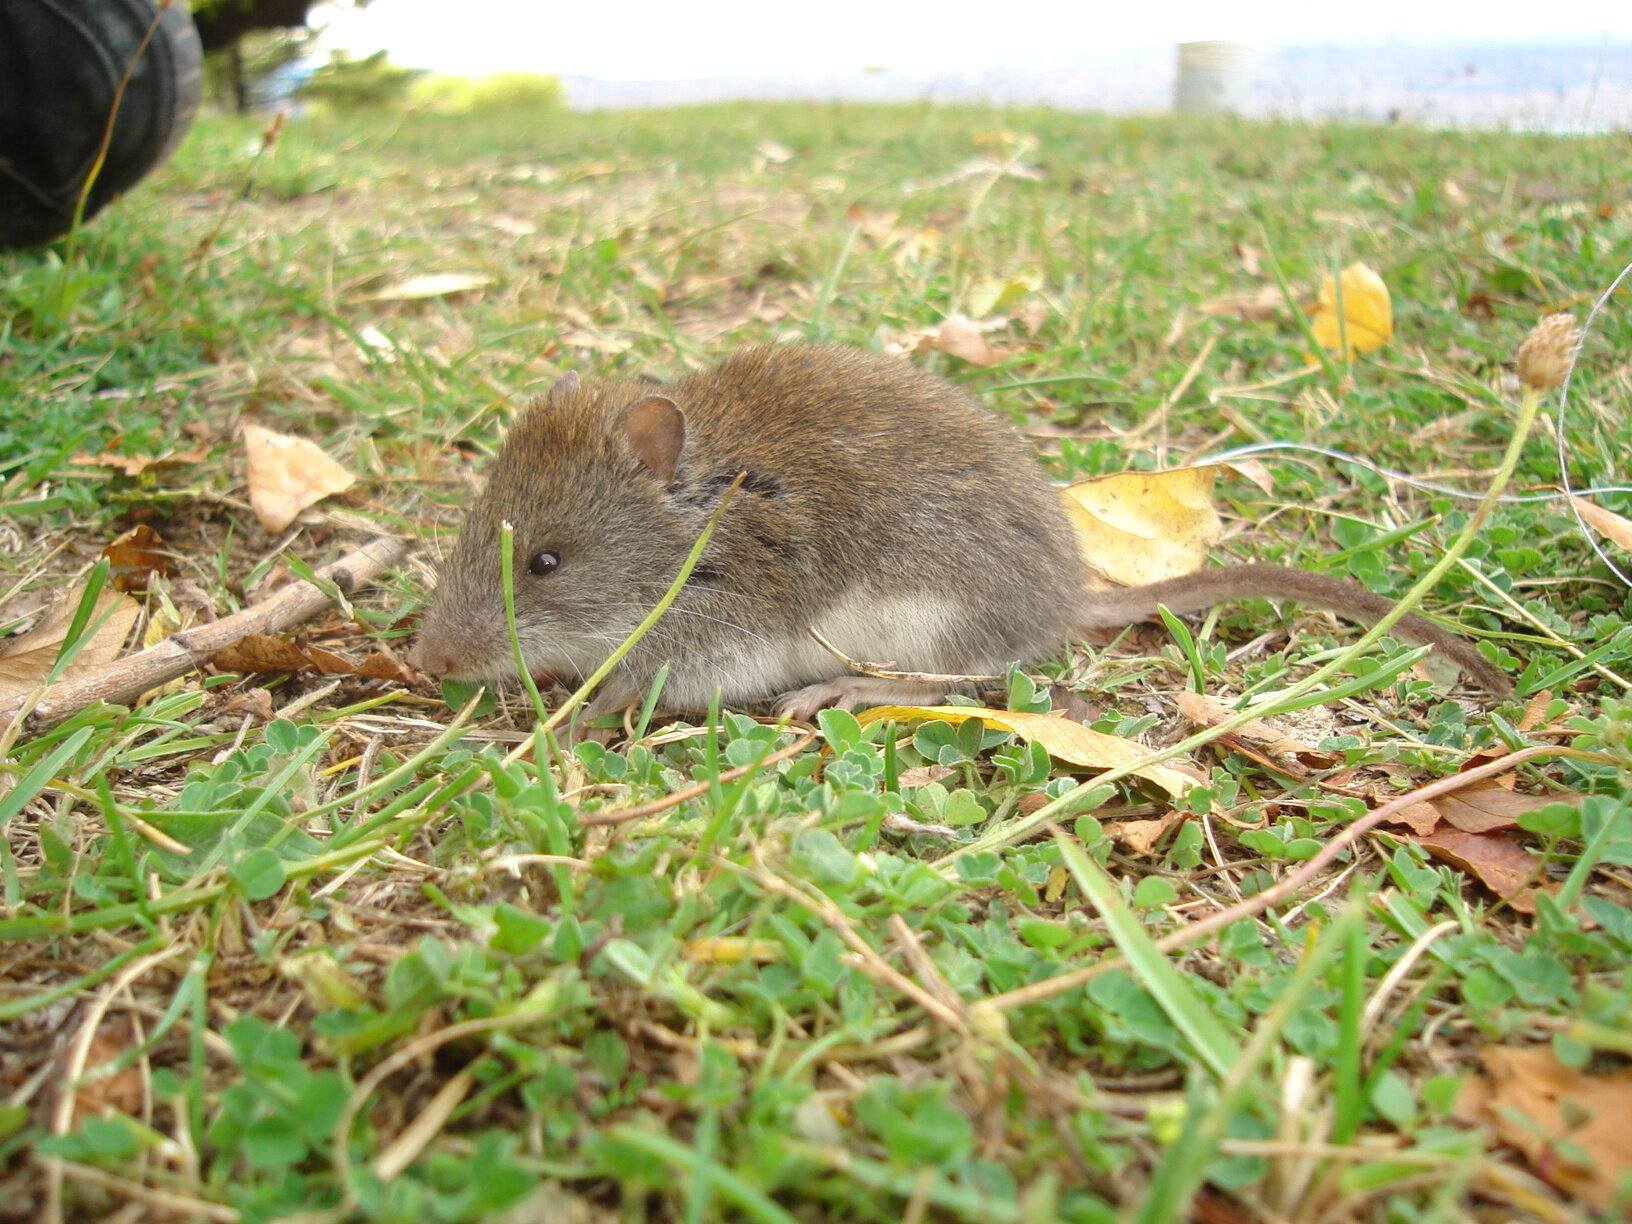 These mice grow bigger on the rainier sides of mountains: It might be a new rule of nature